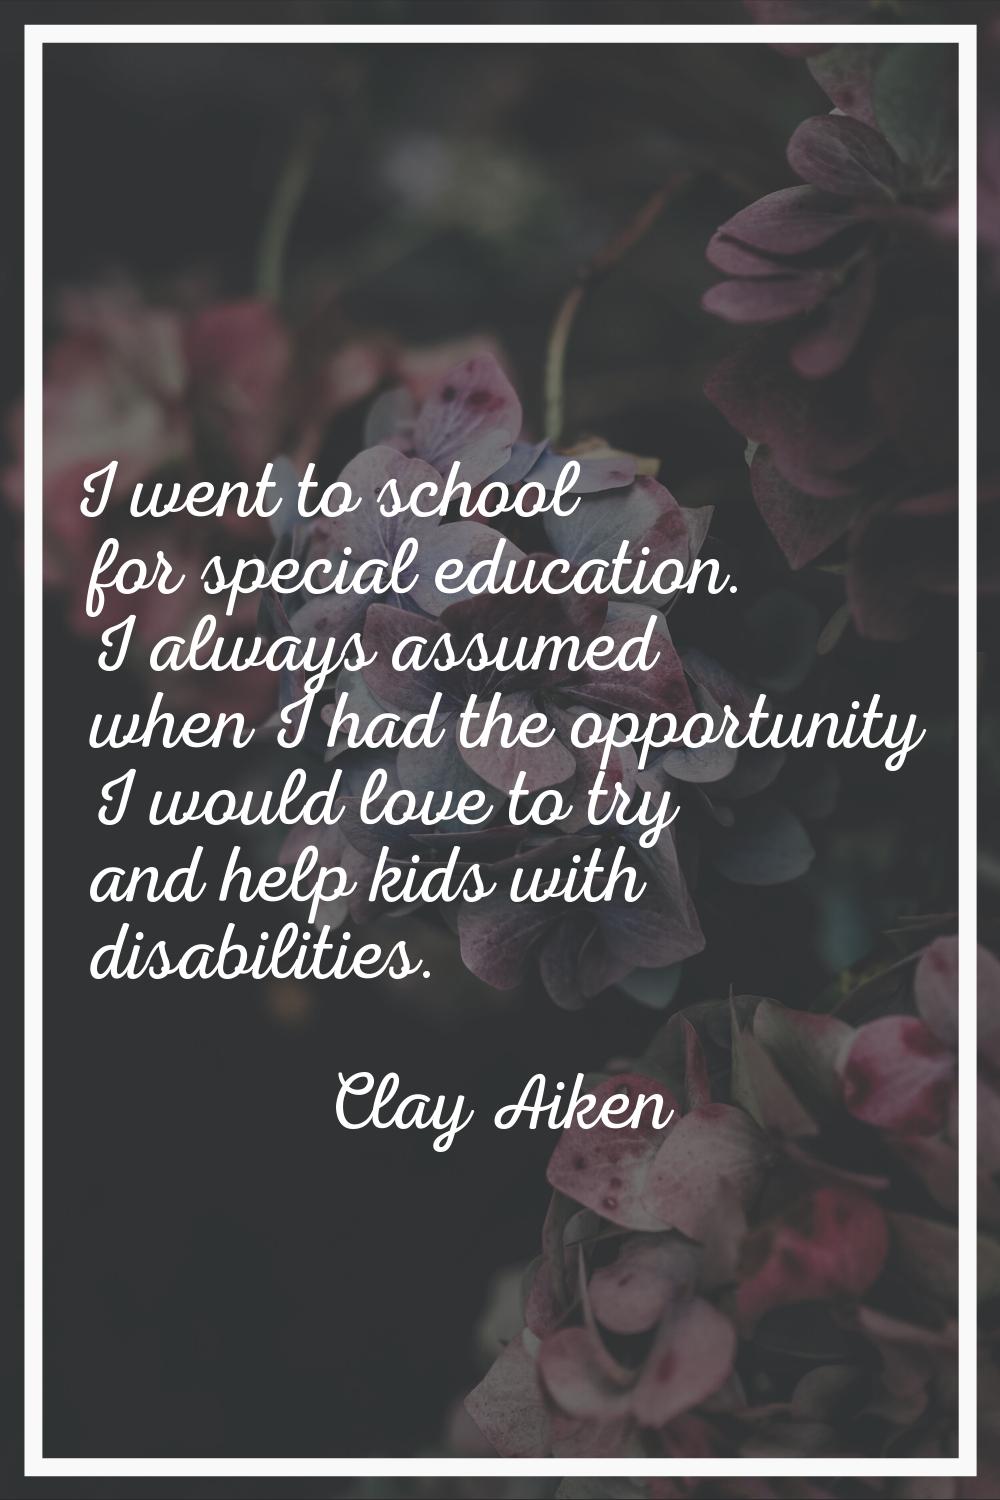 I went to school for special education. I always assumed when I had the opportunity I would love to